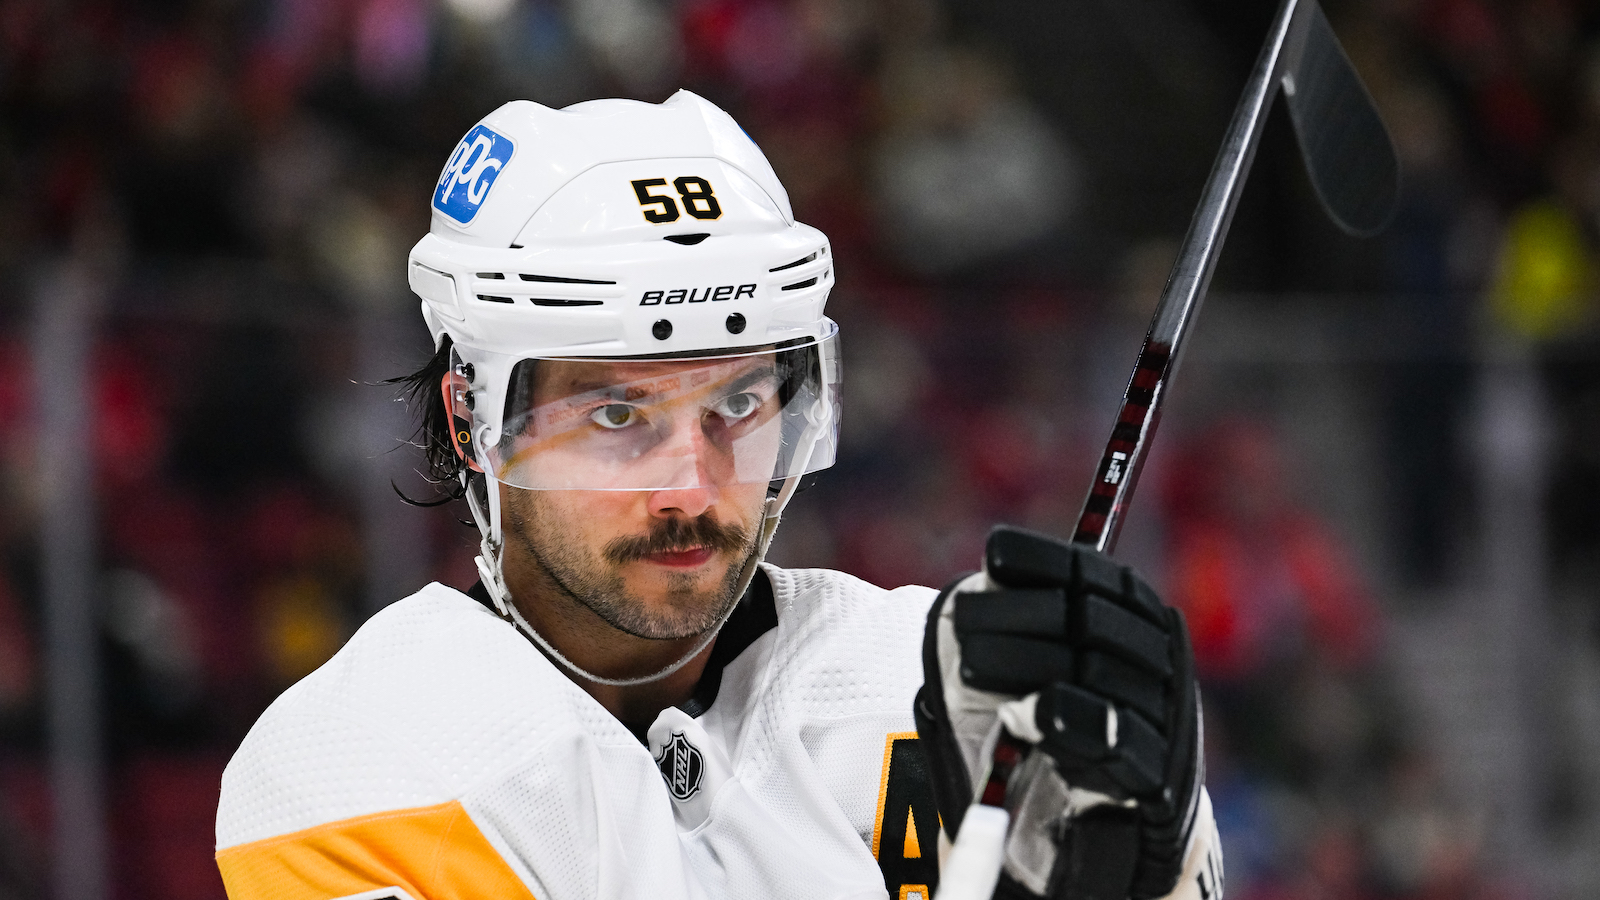 Penguins' Hextall says he'd 'be surprised' if Letang deal doesn't get done